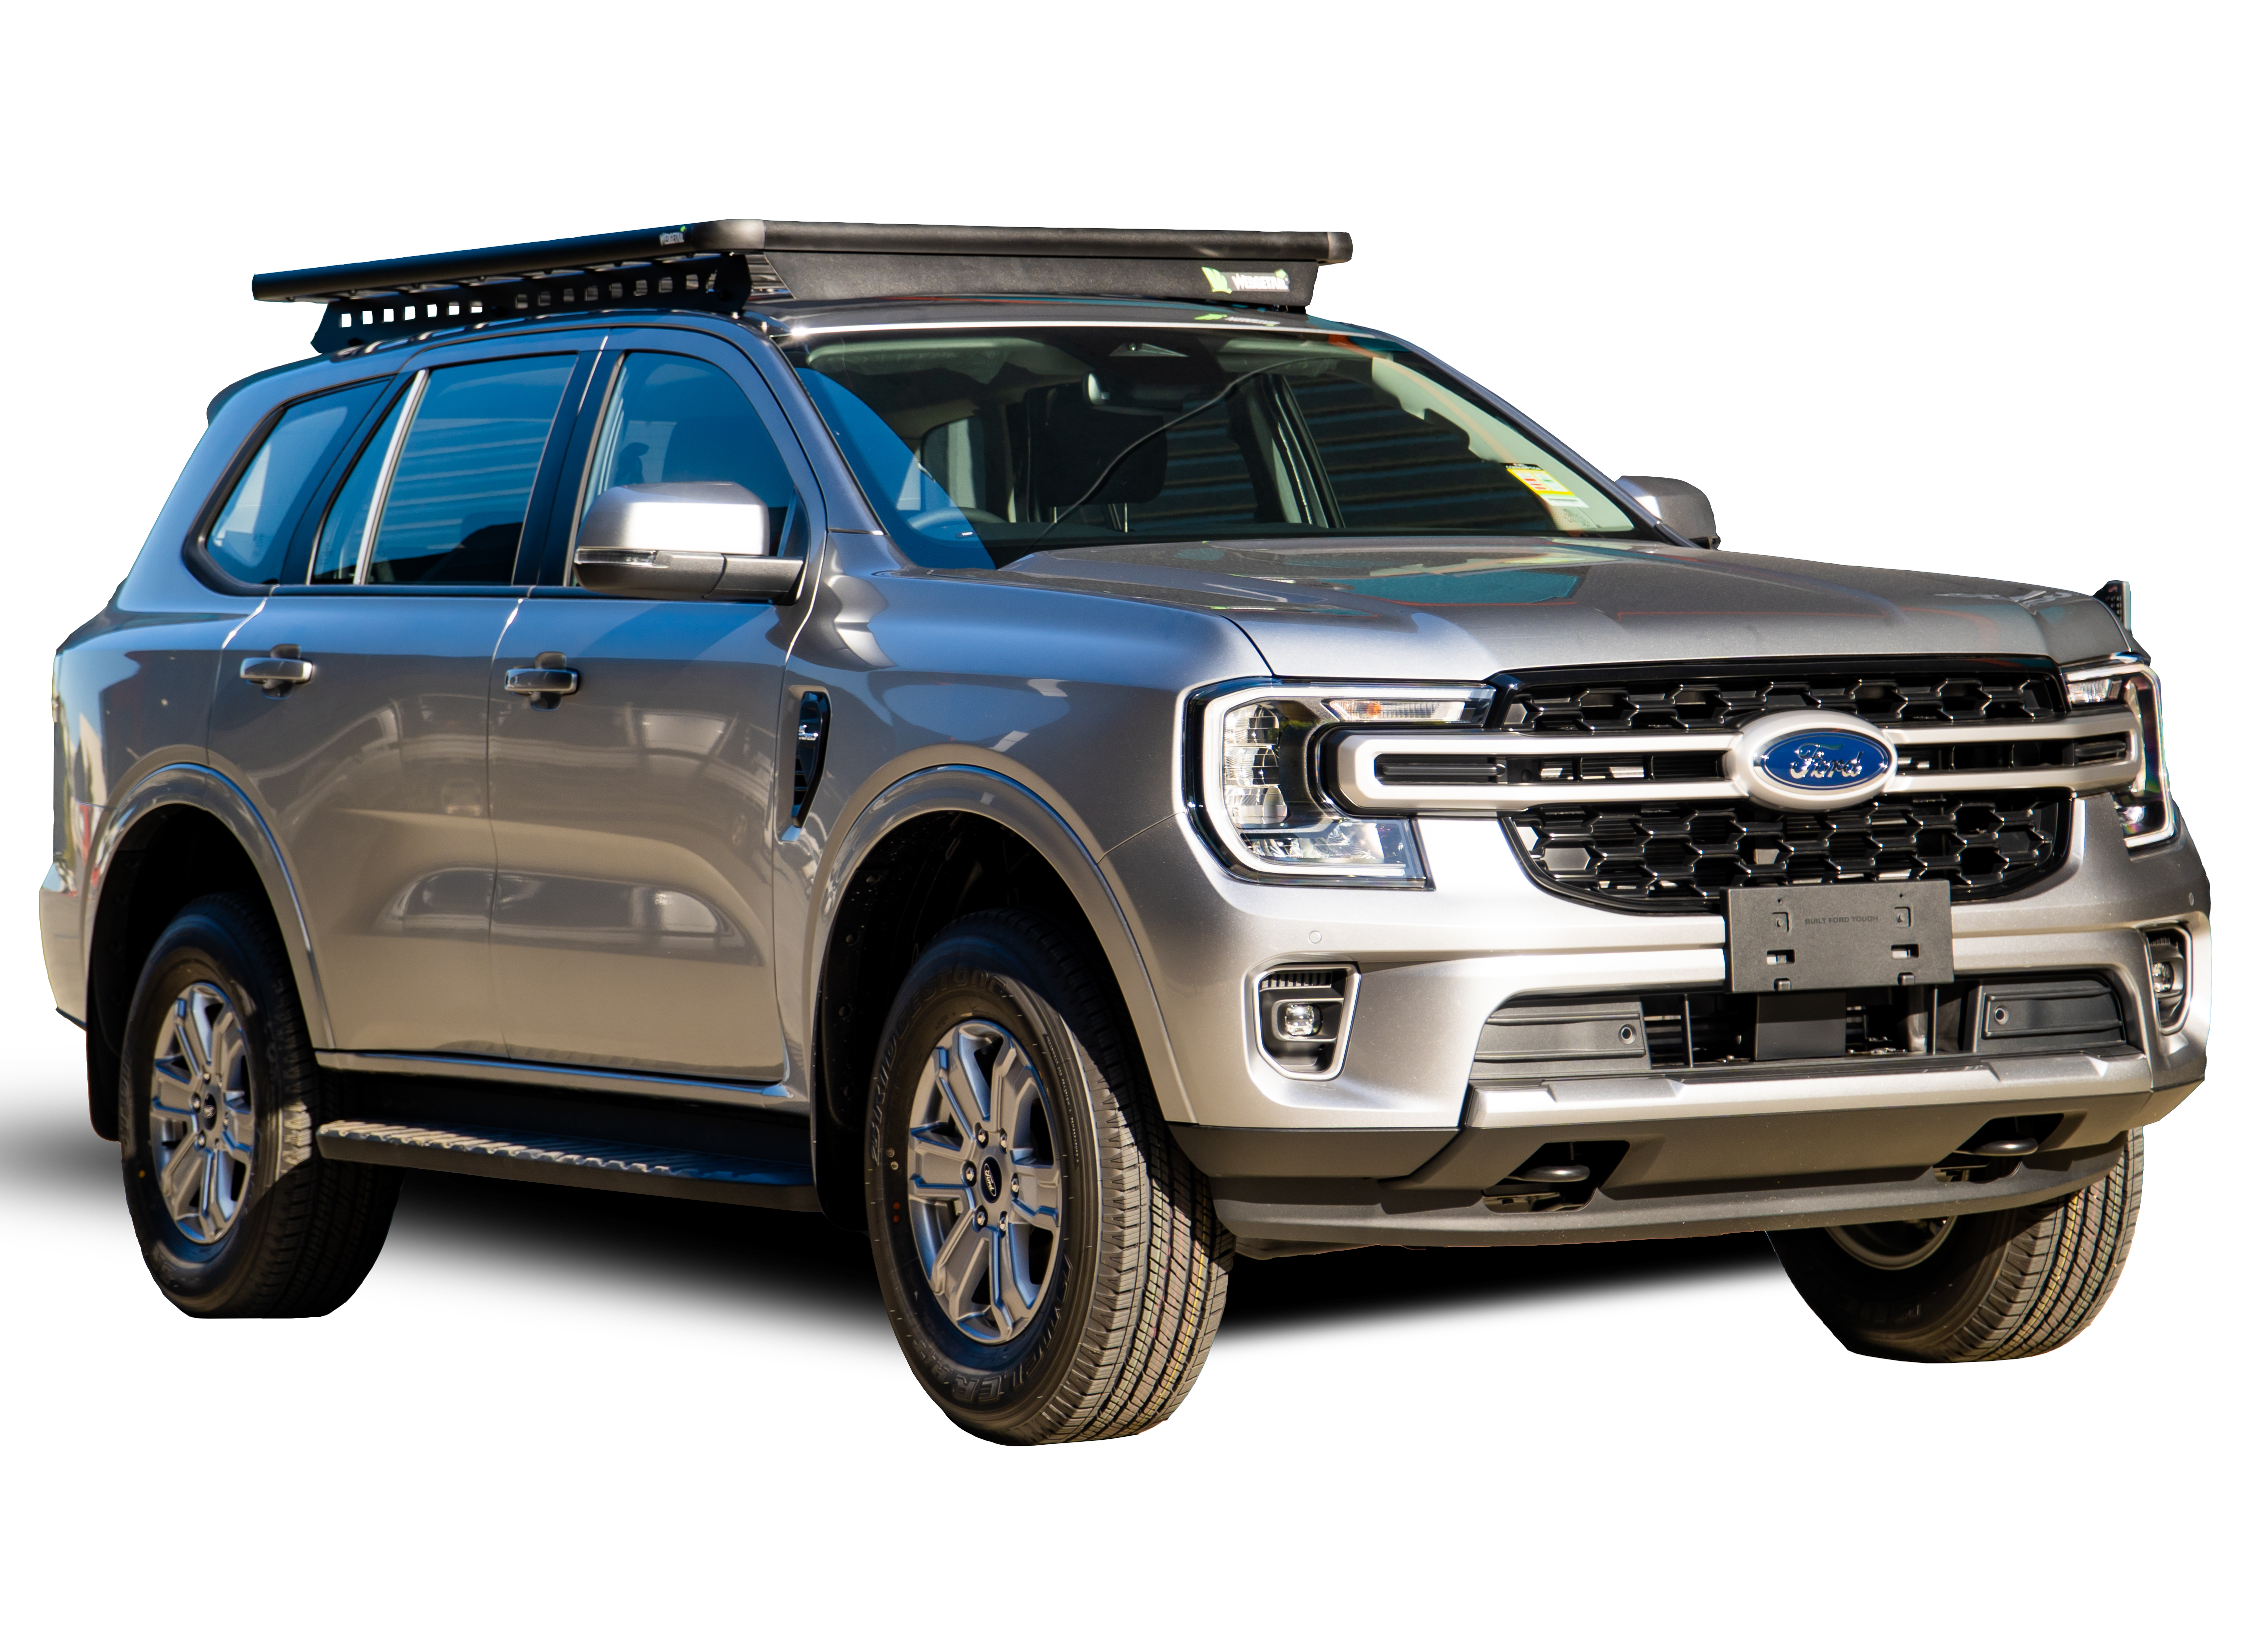 Ford Everest hero image showing the Everest with a Wedgetail platform roof rack installed.